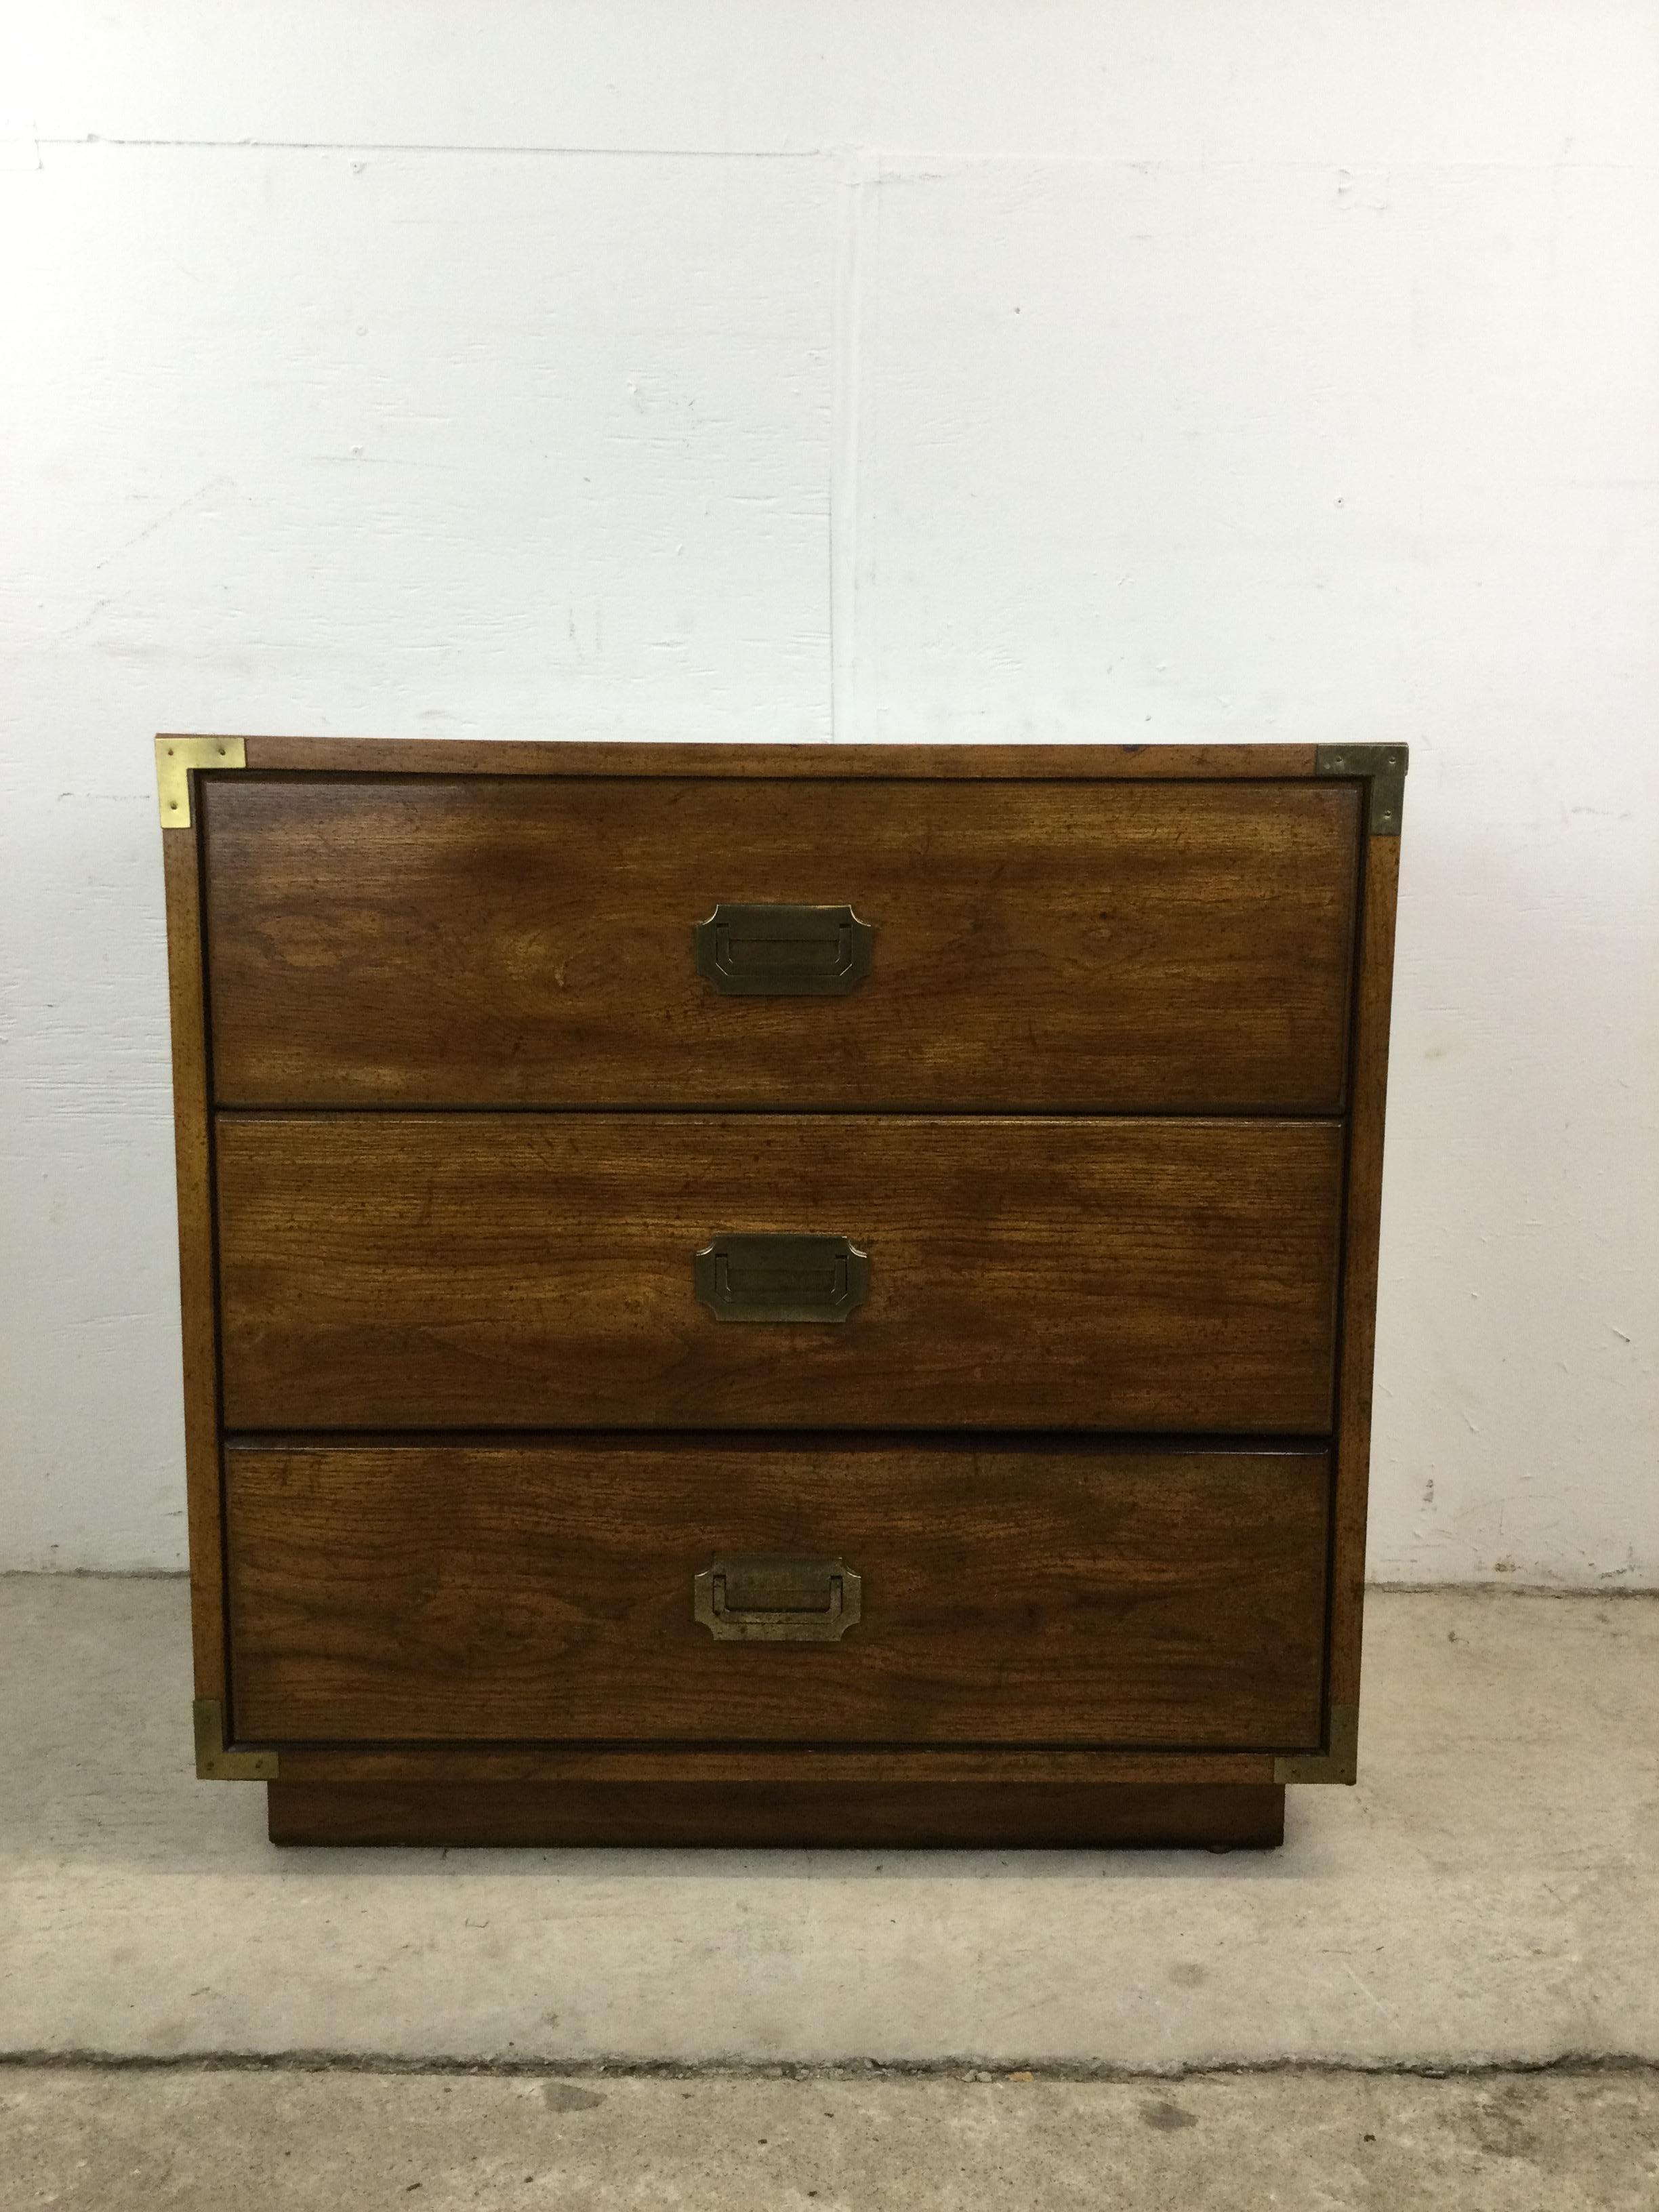 This mid century campaign style dresser features dark oak finish, durable vinyl top with faux wood grain, three dovetailed drawers, and brass accented hardware.

Matching three drawer chest & highboy dresser available separately.

Dimensions: 30w